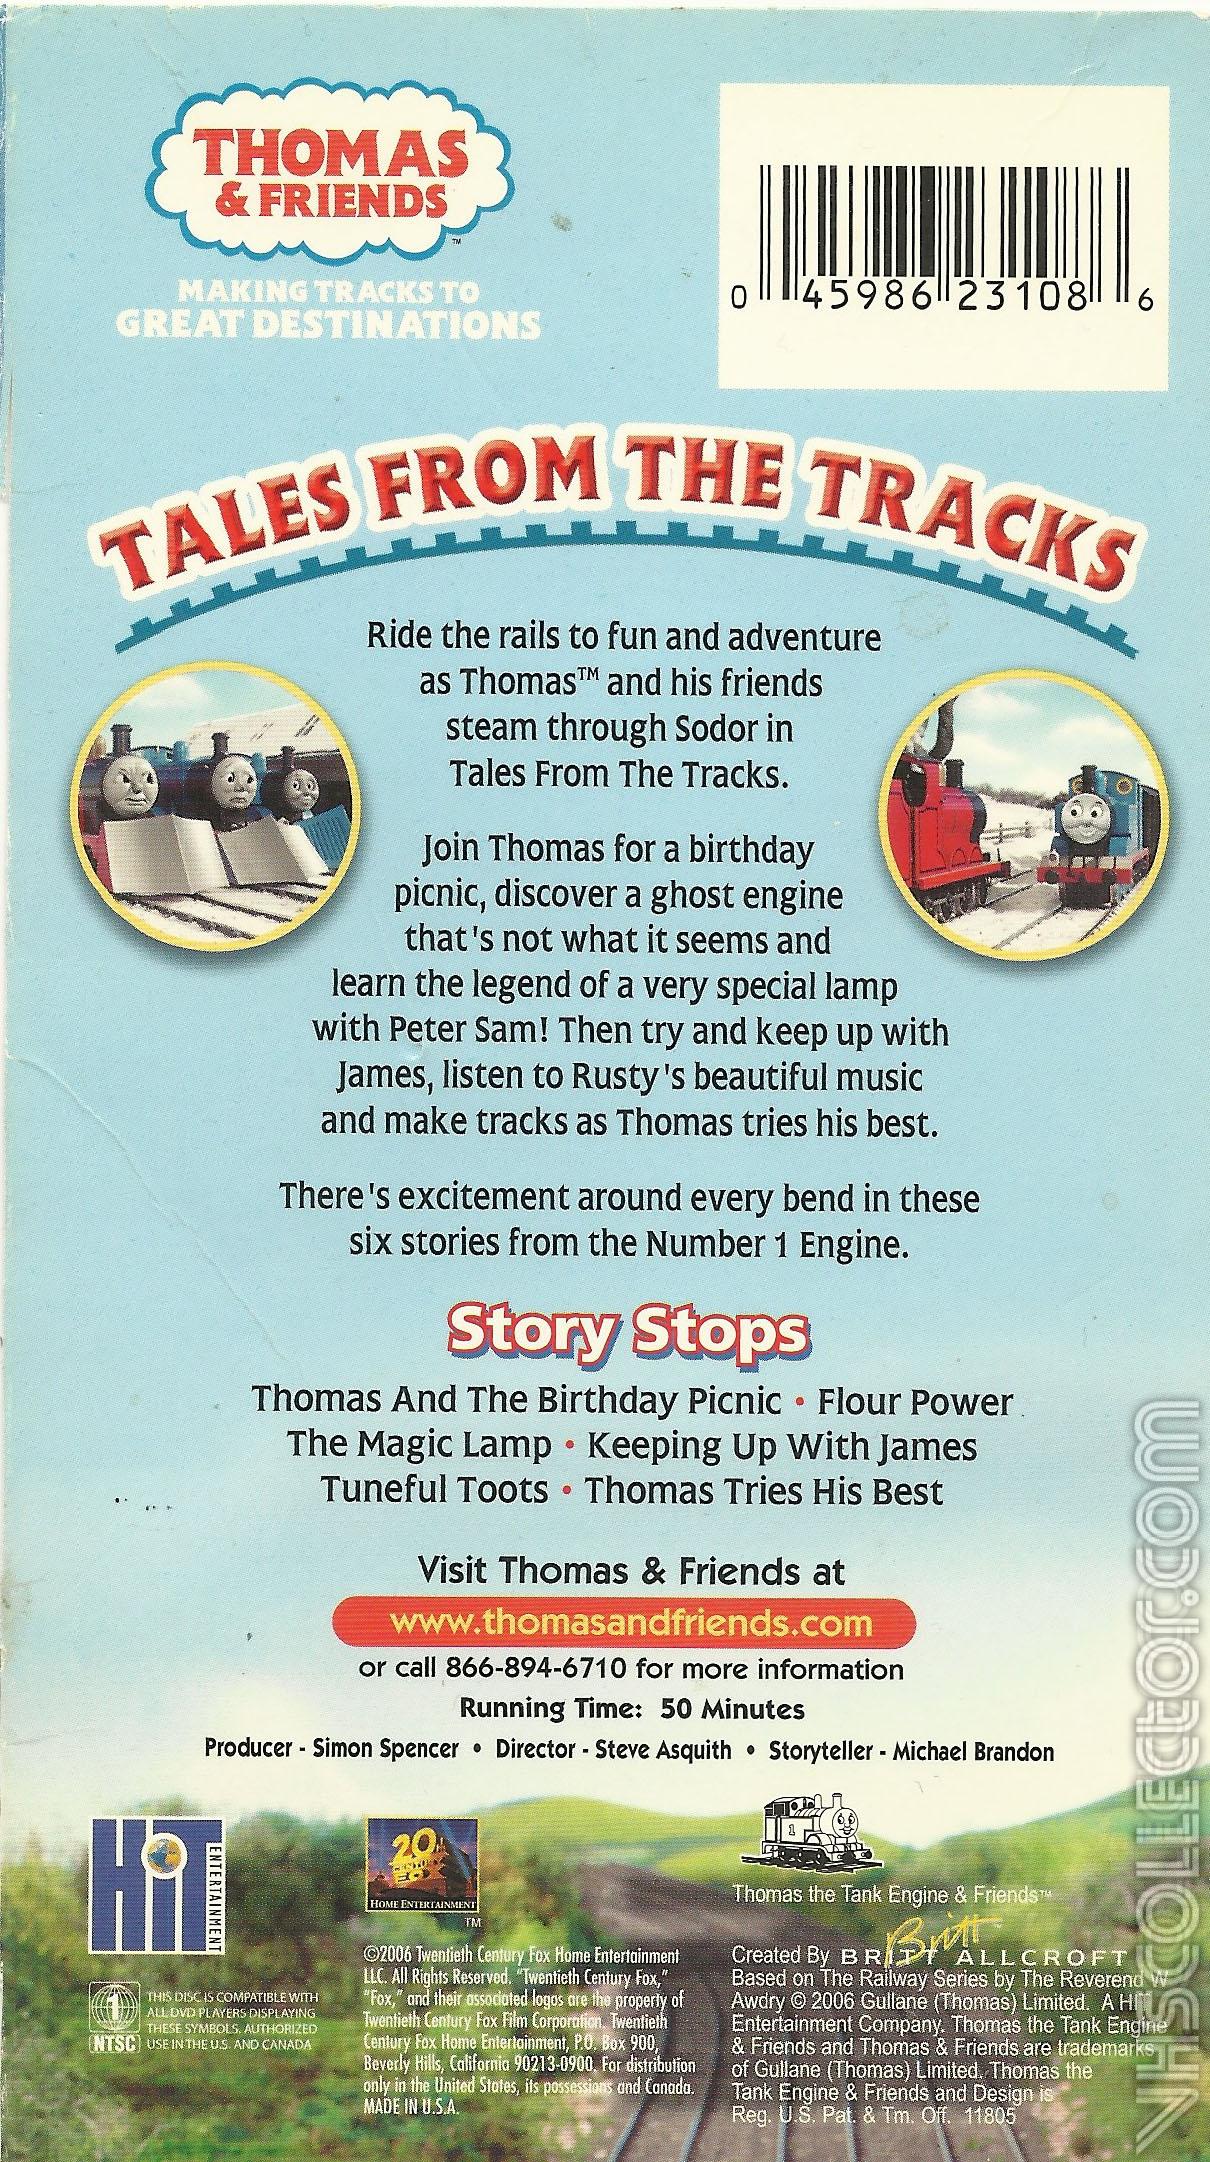 Thomas And Friends VHS Archive